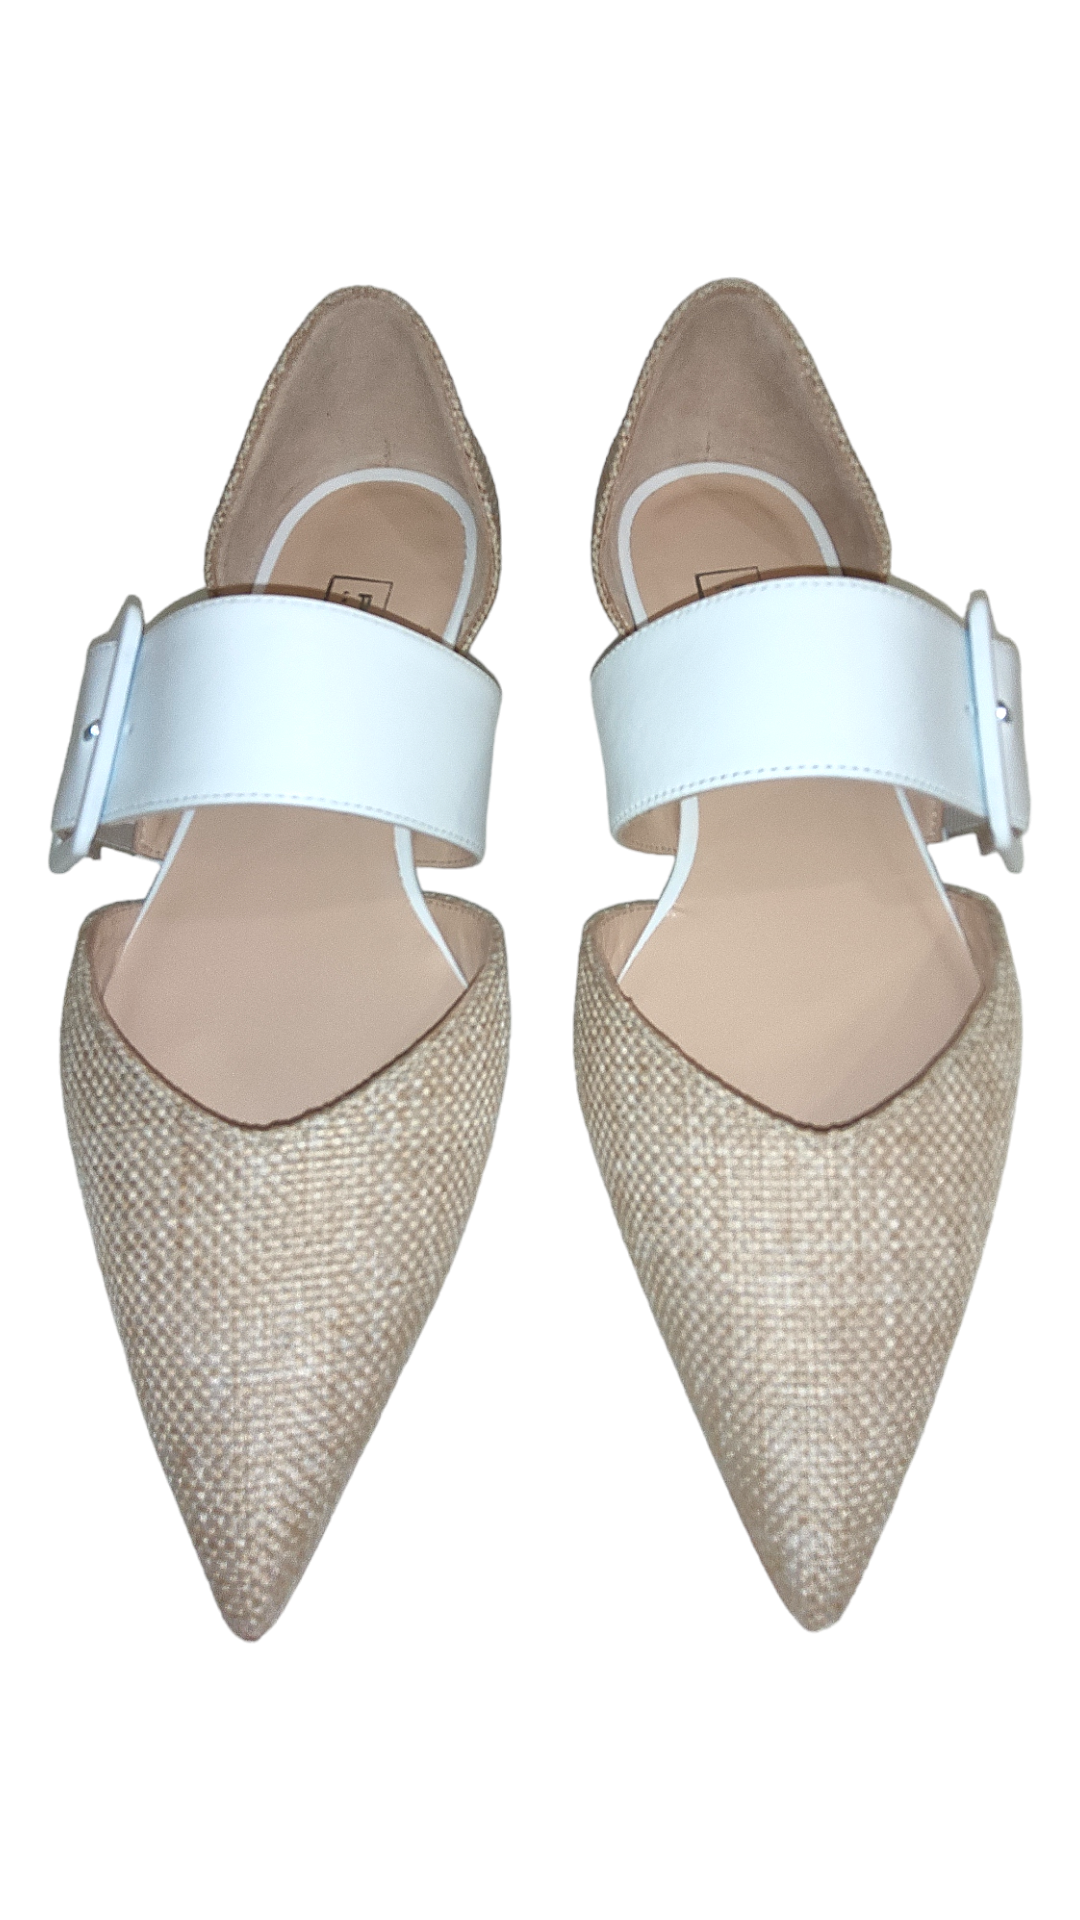 Beige leather pumps.Coming back soon!!!